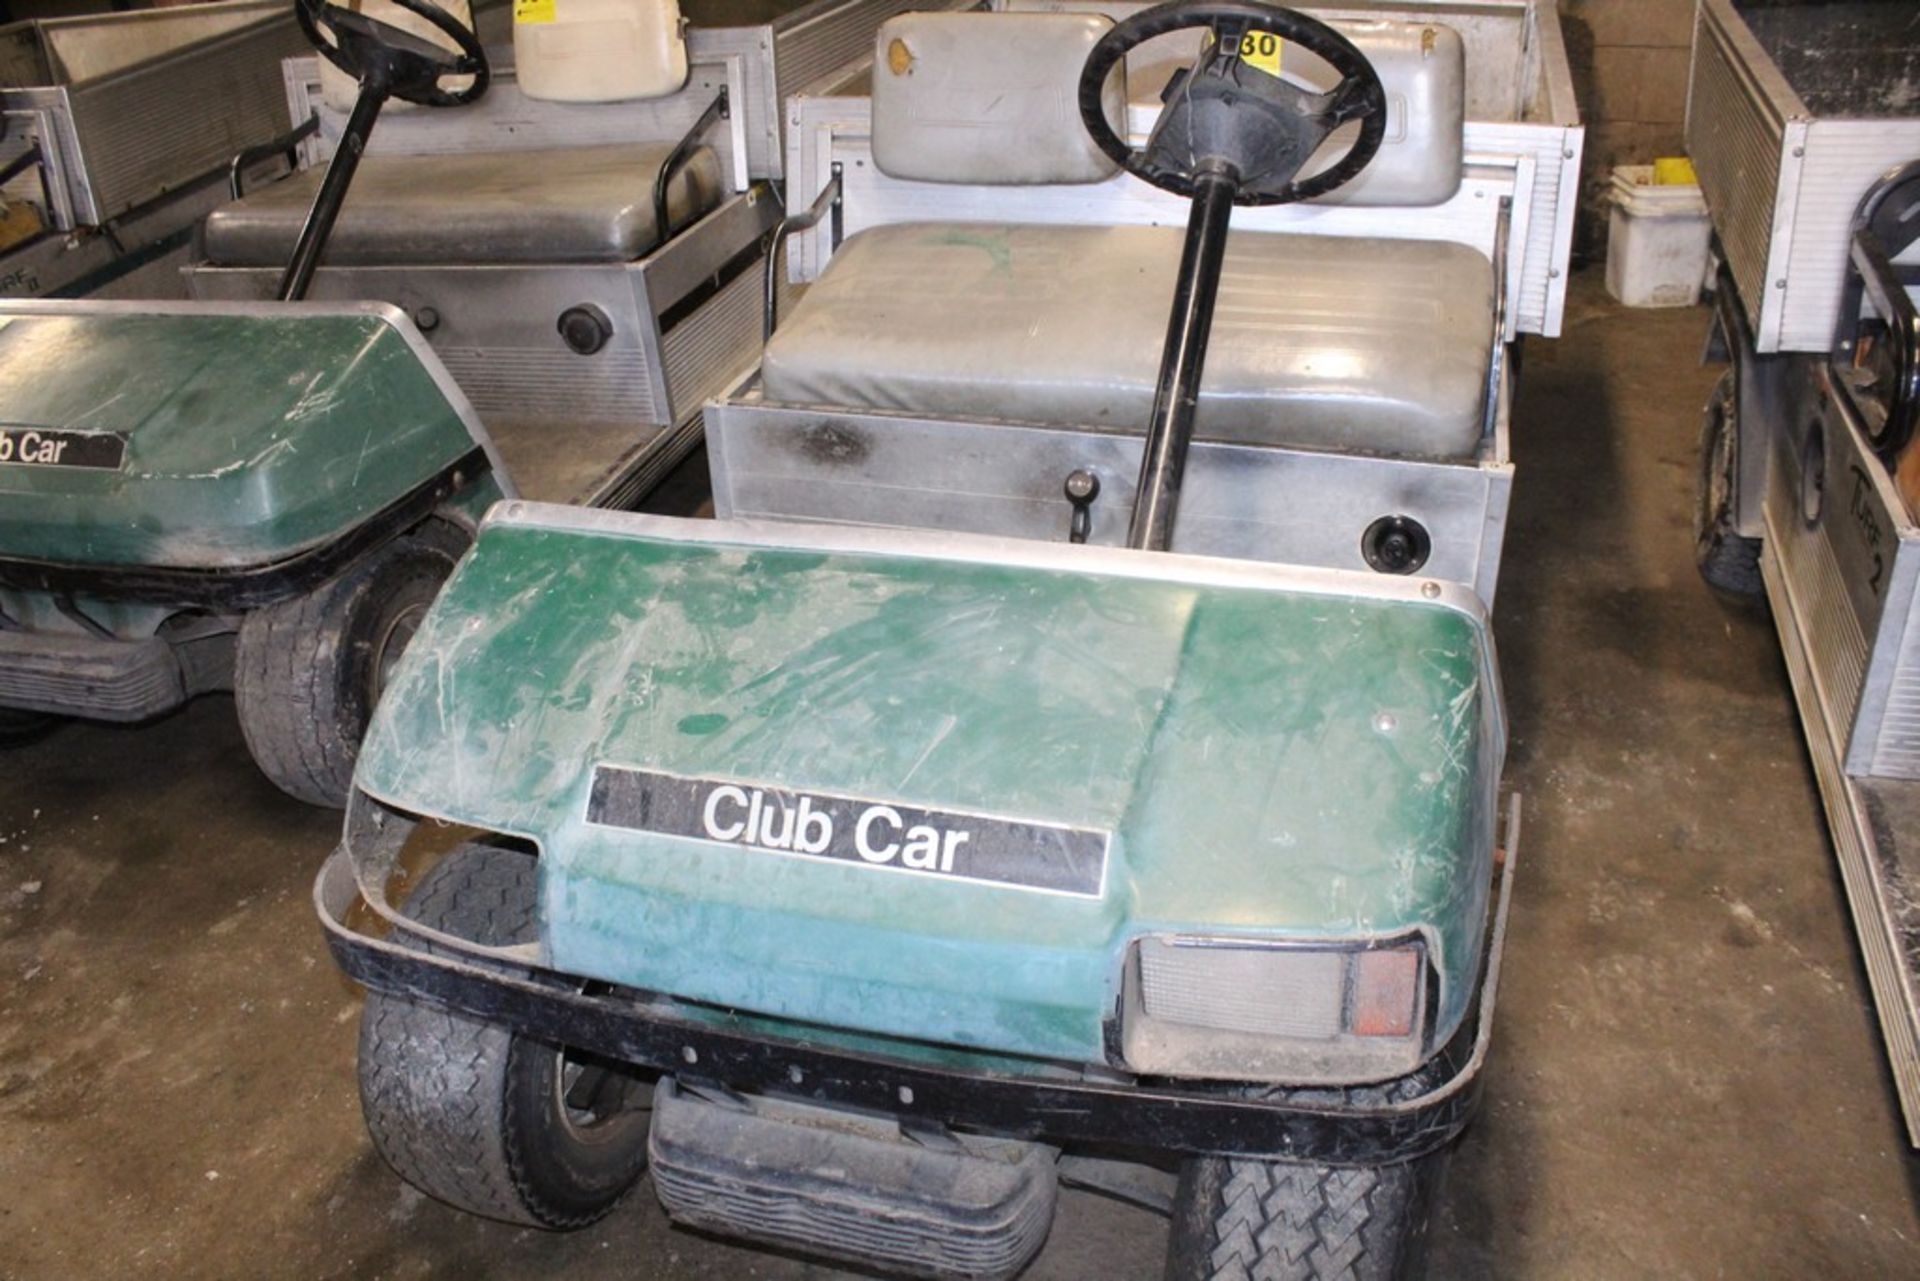 CLUB CAR TURF 2 GAS POWERED CART, MANUAL DUMP BED 4,562 HOURS CONDITION: TURNS OVER WITH A JUMP - Image 2 of 6